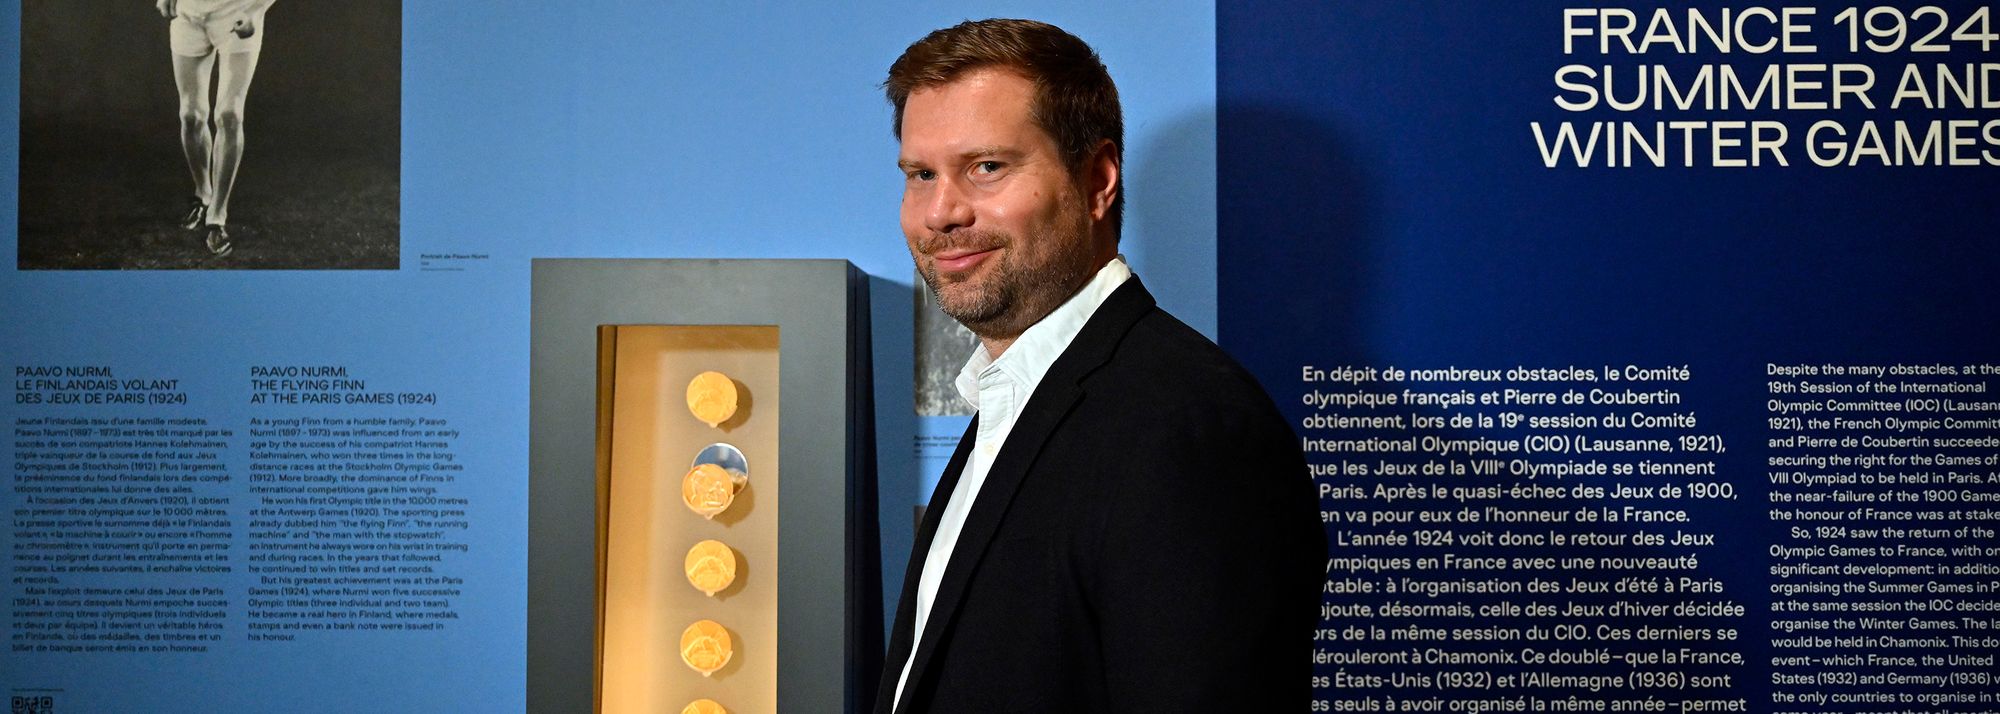 Mika Nurmi was in the heart of the French capital for the public opening of an exhibition in which his grandfather's Paris 1924 Olympic gold medals are the centrepiece